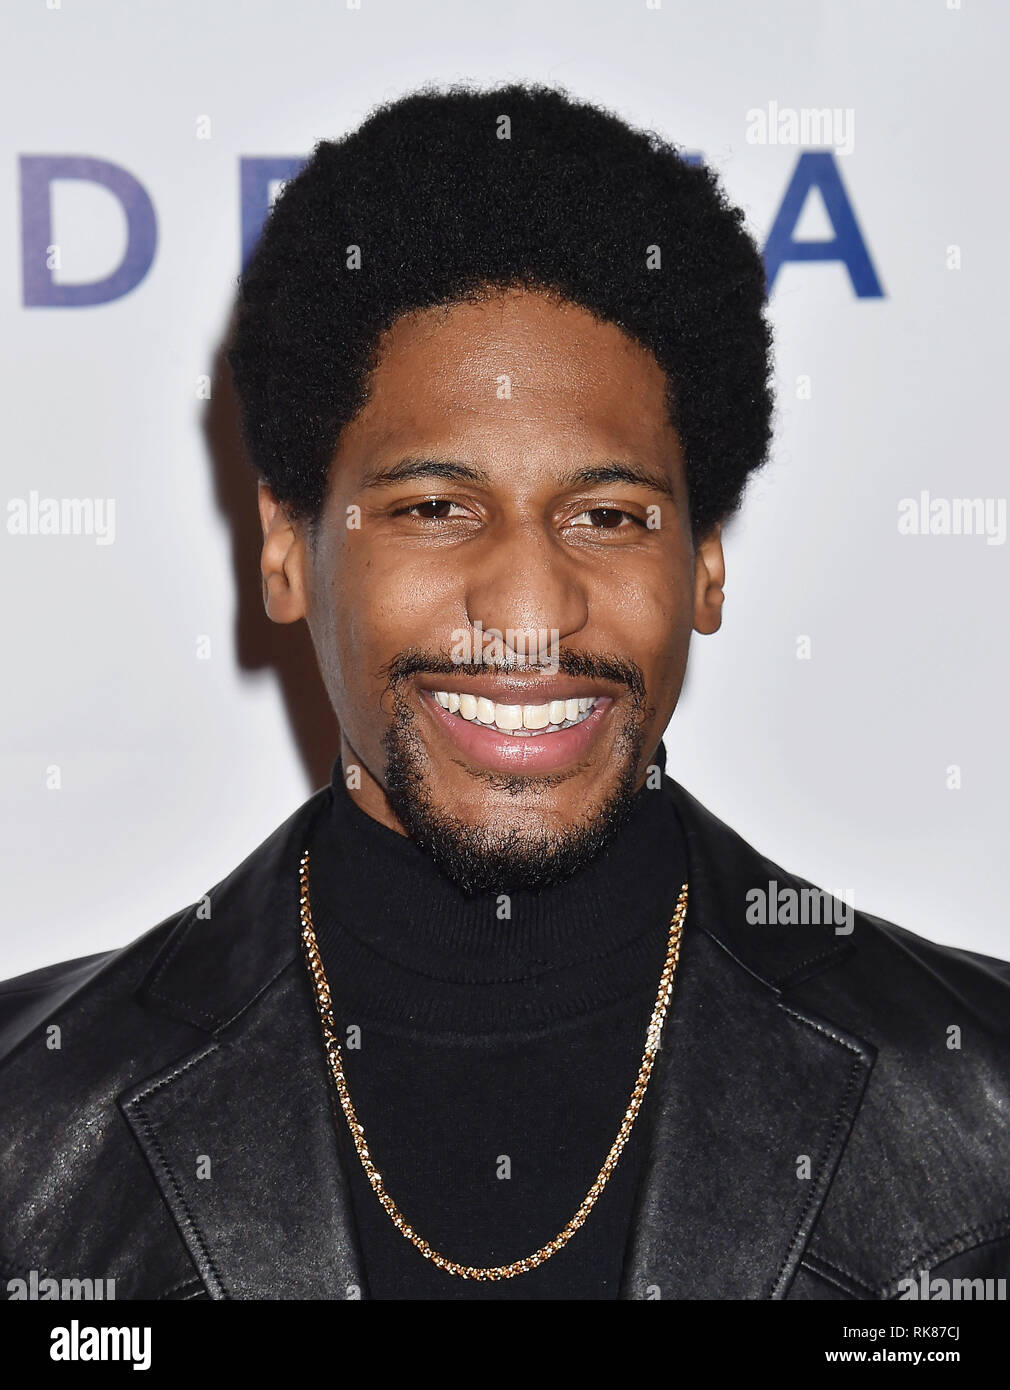 LOS ANGELES, CA - FEBRUARY 08: Jon Batiste attends MusiCares Person of ...